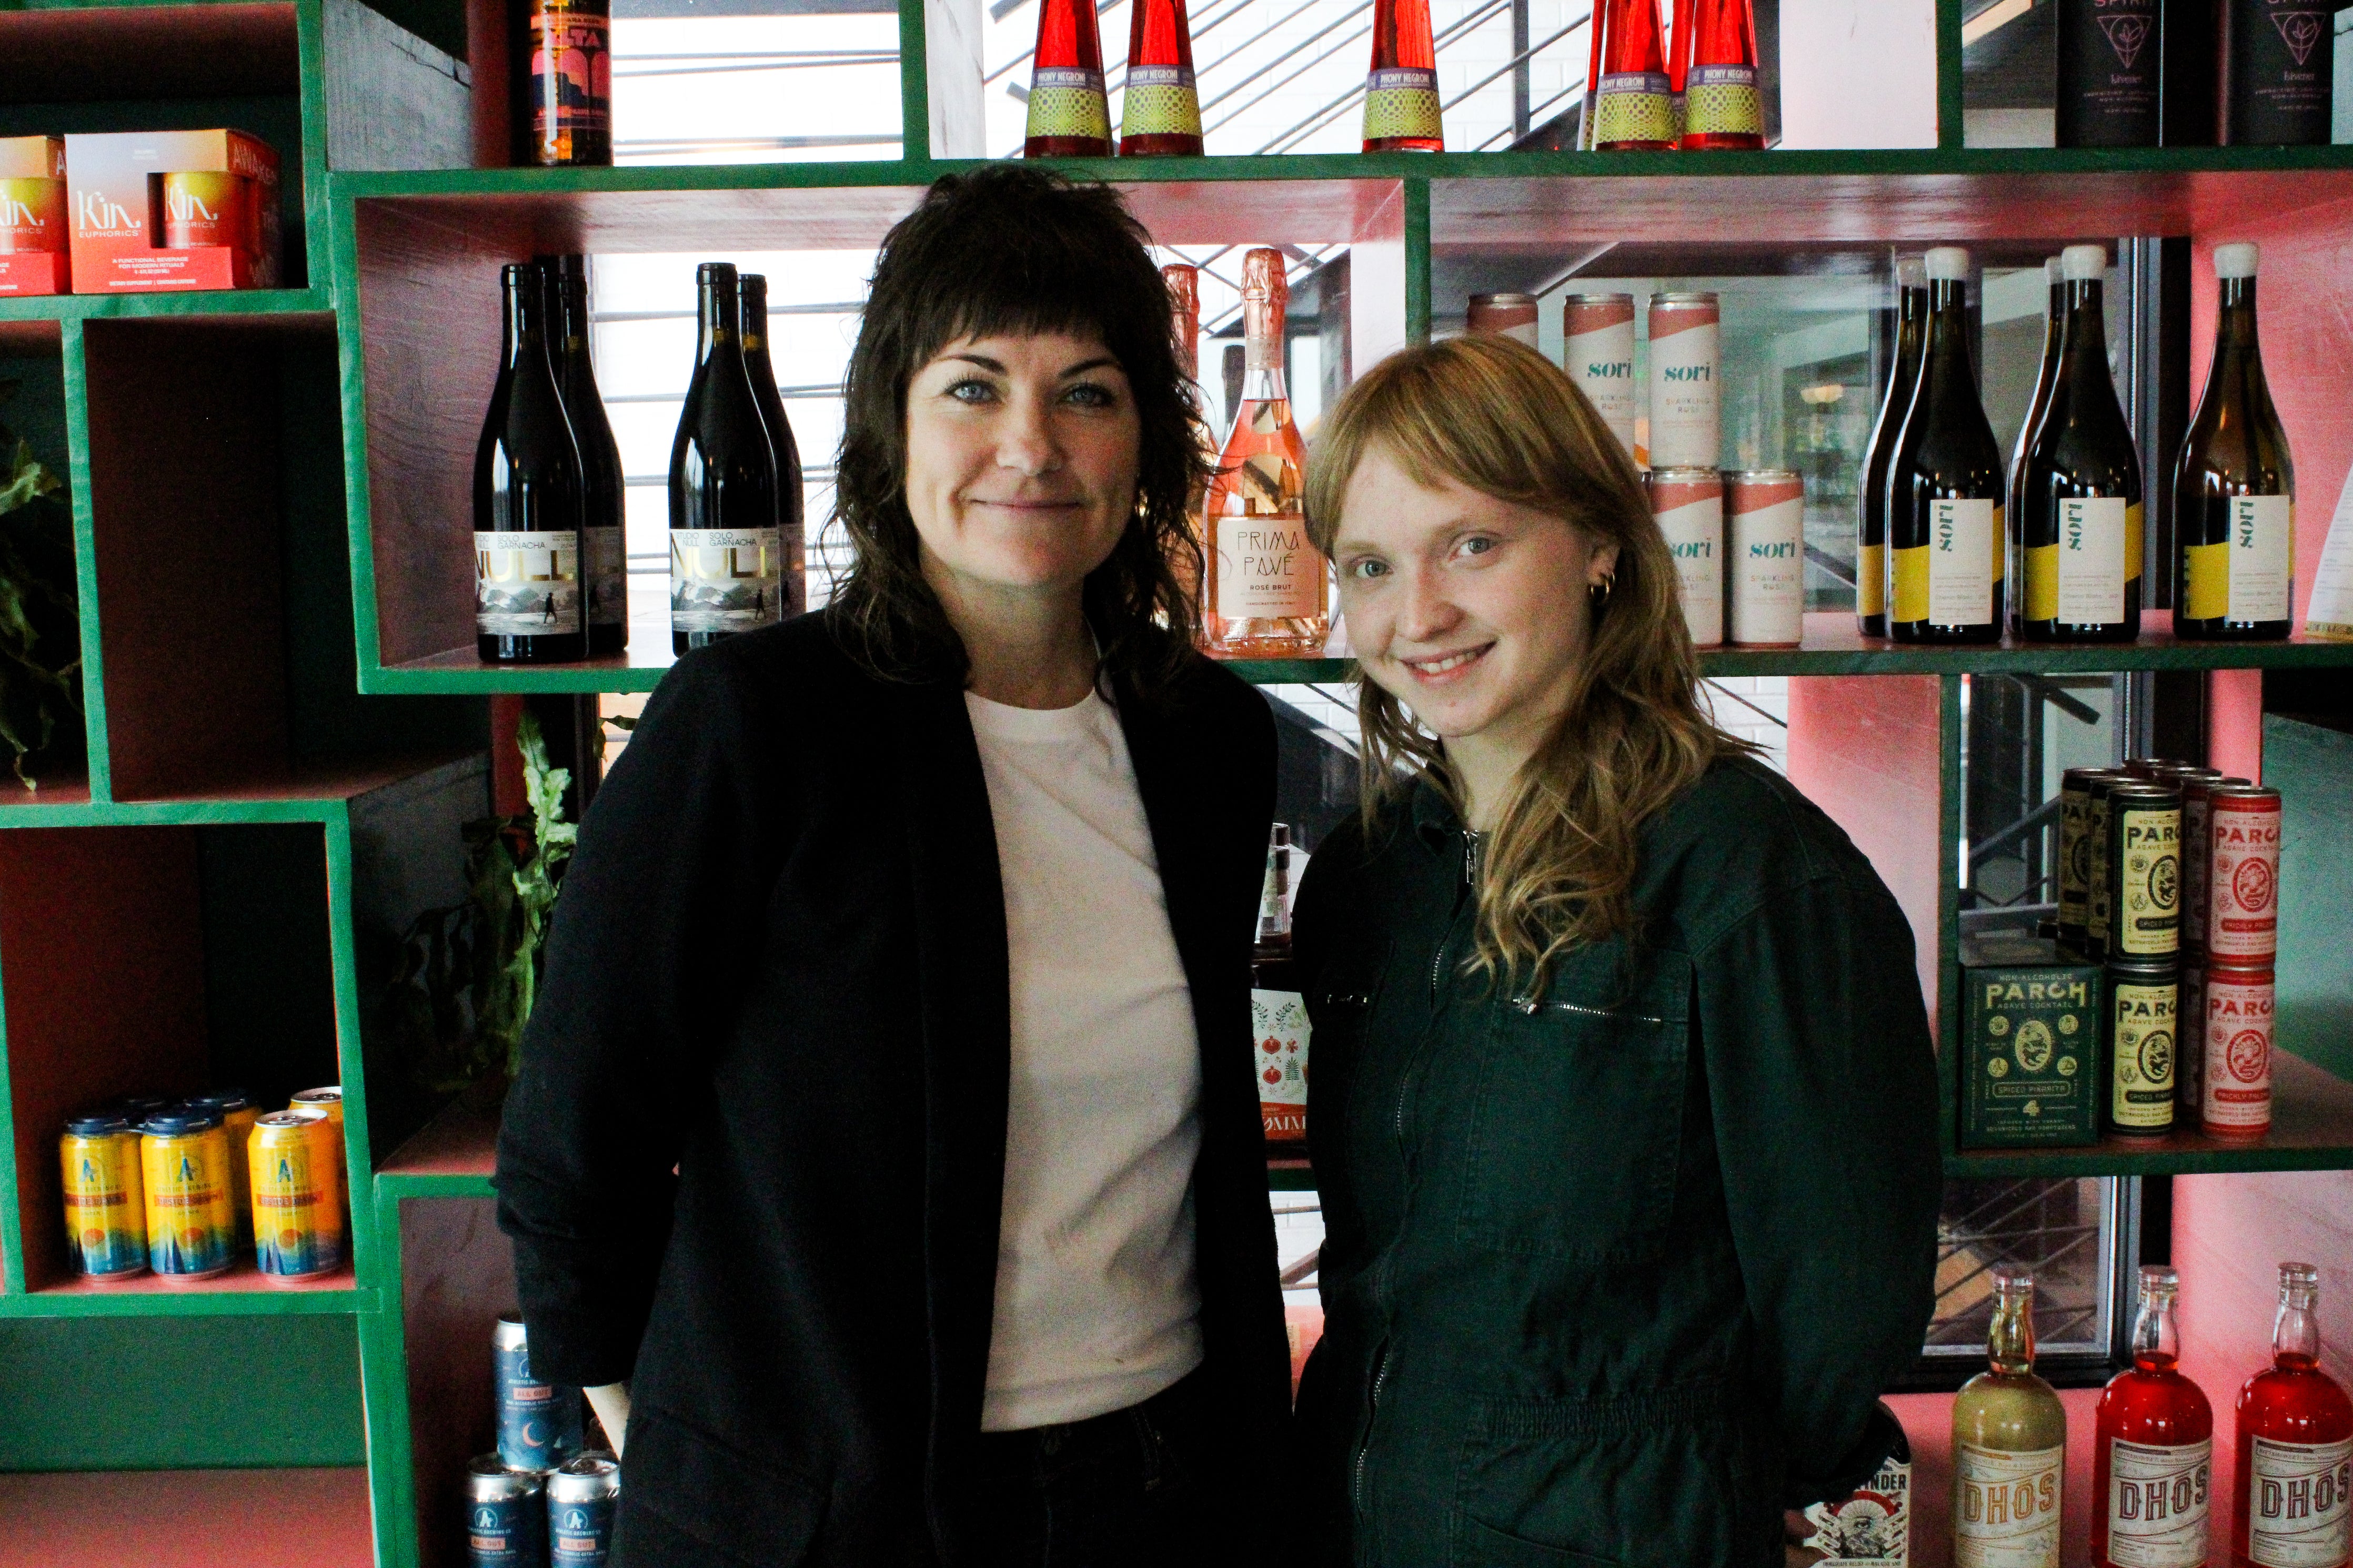 Two women stand in front of a colorful bottle display at Curiosity.